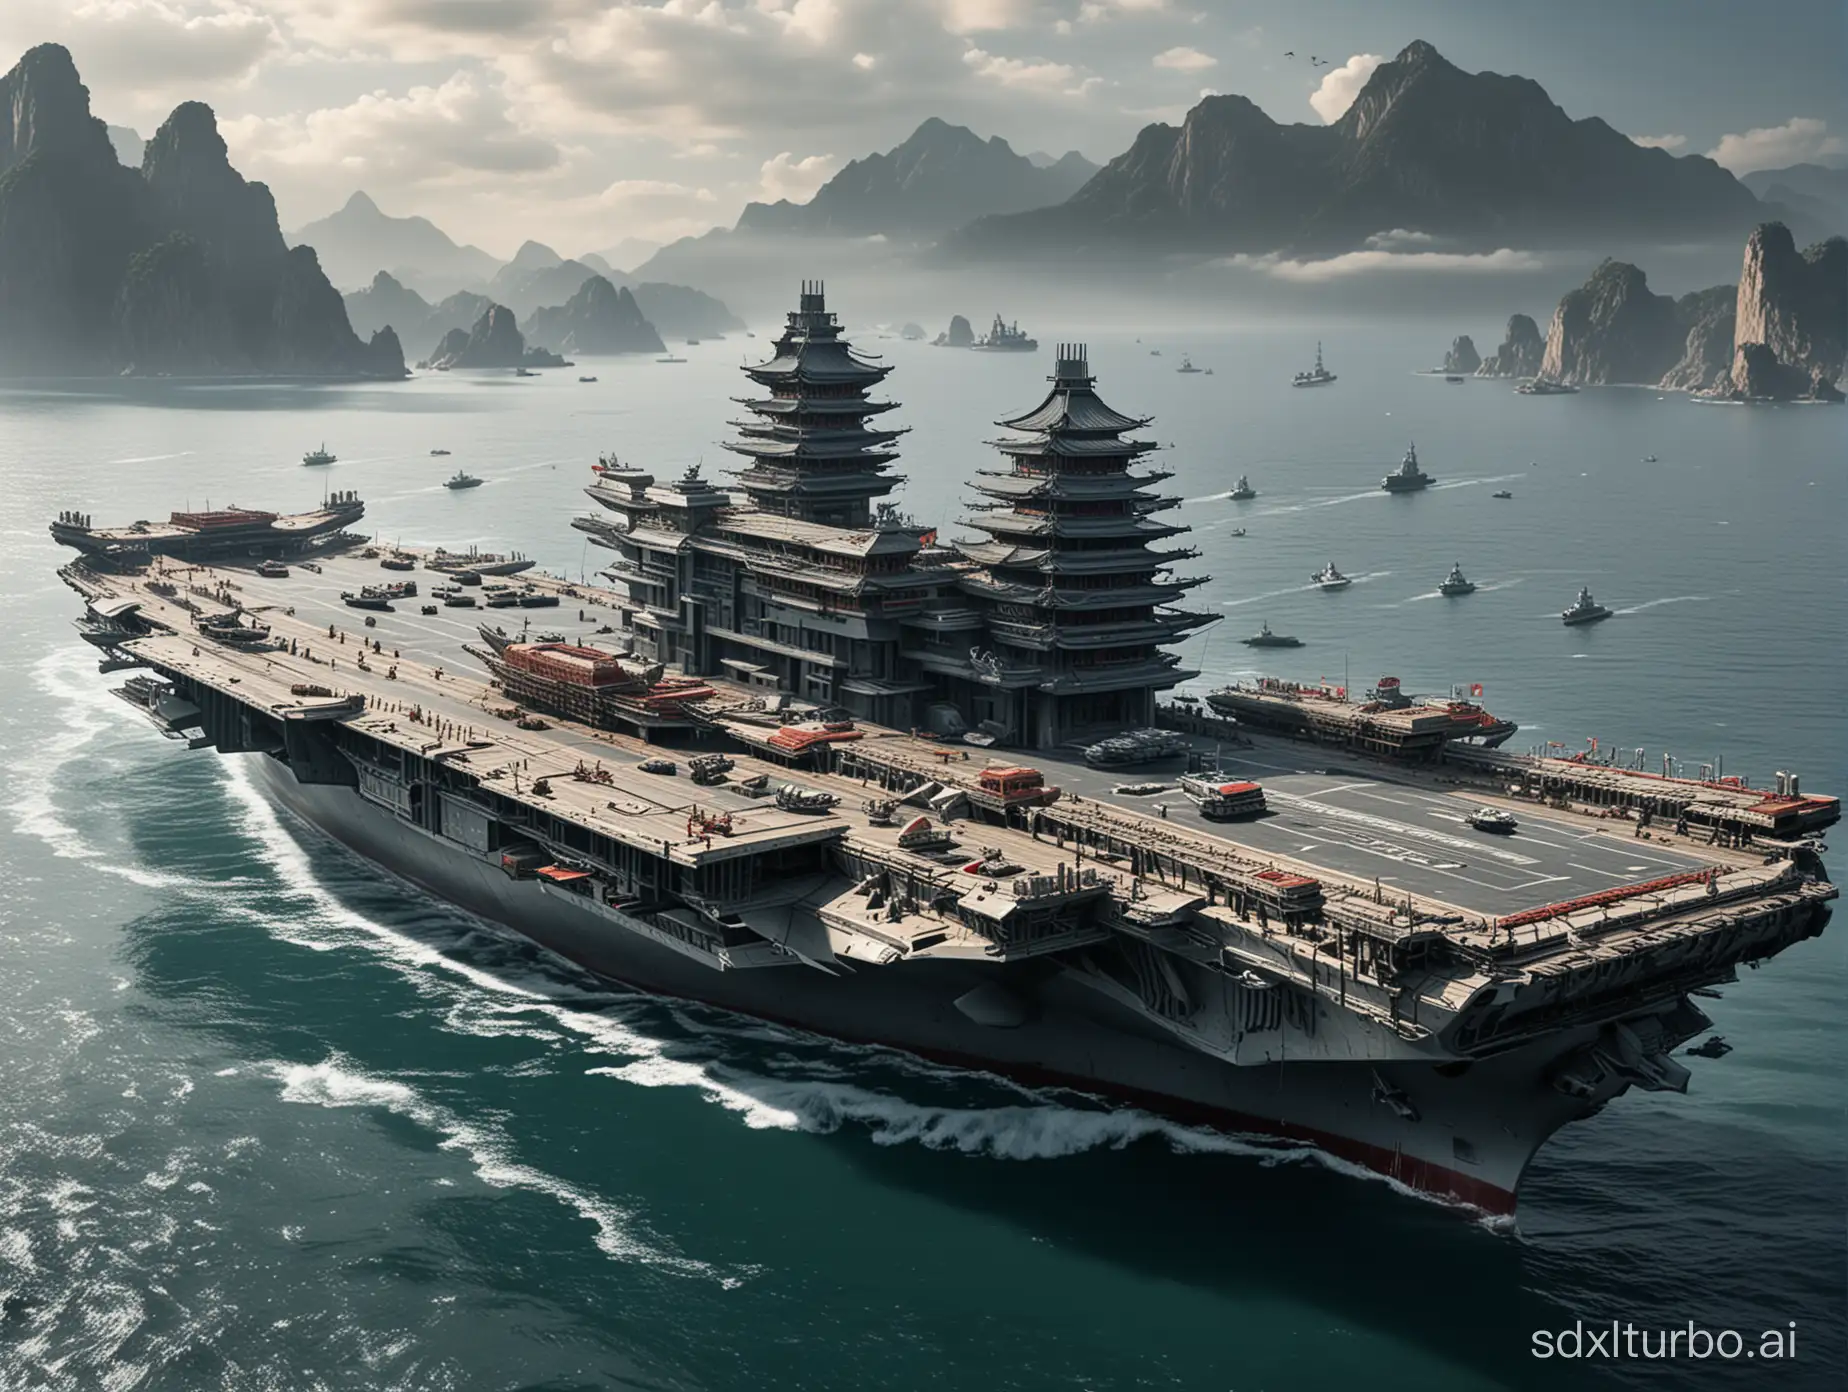 Design an aircraft carrier that blends ancient Chinese architectural elements with modern science fiction elements.